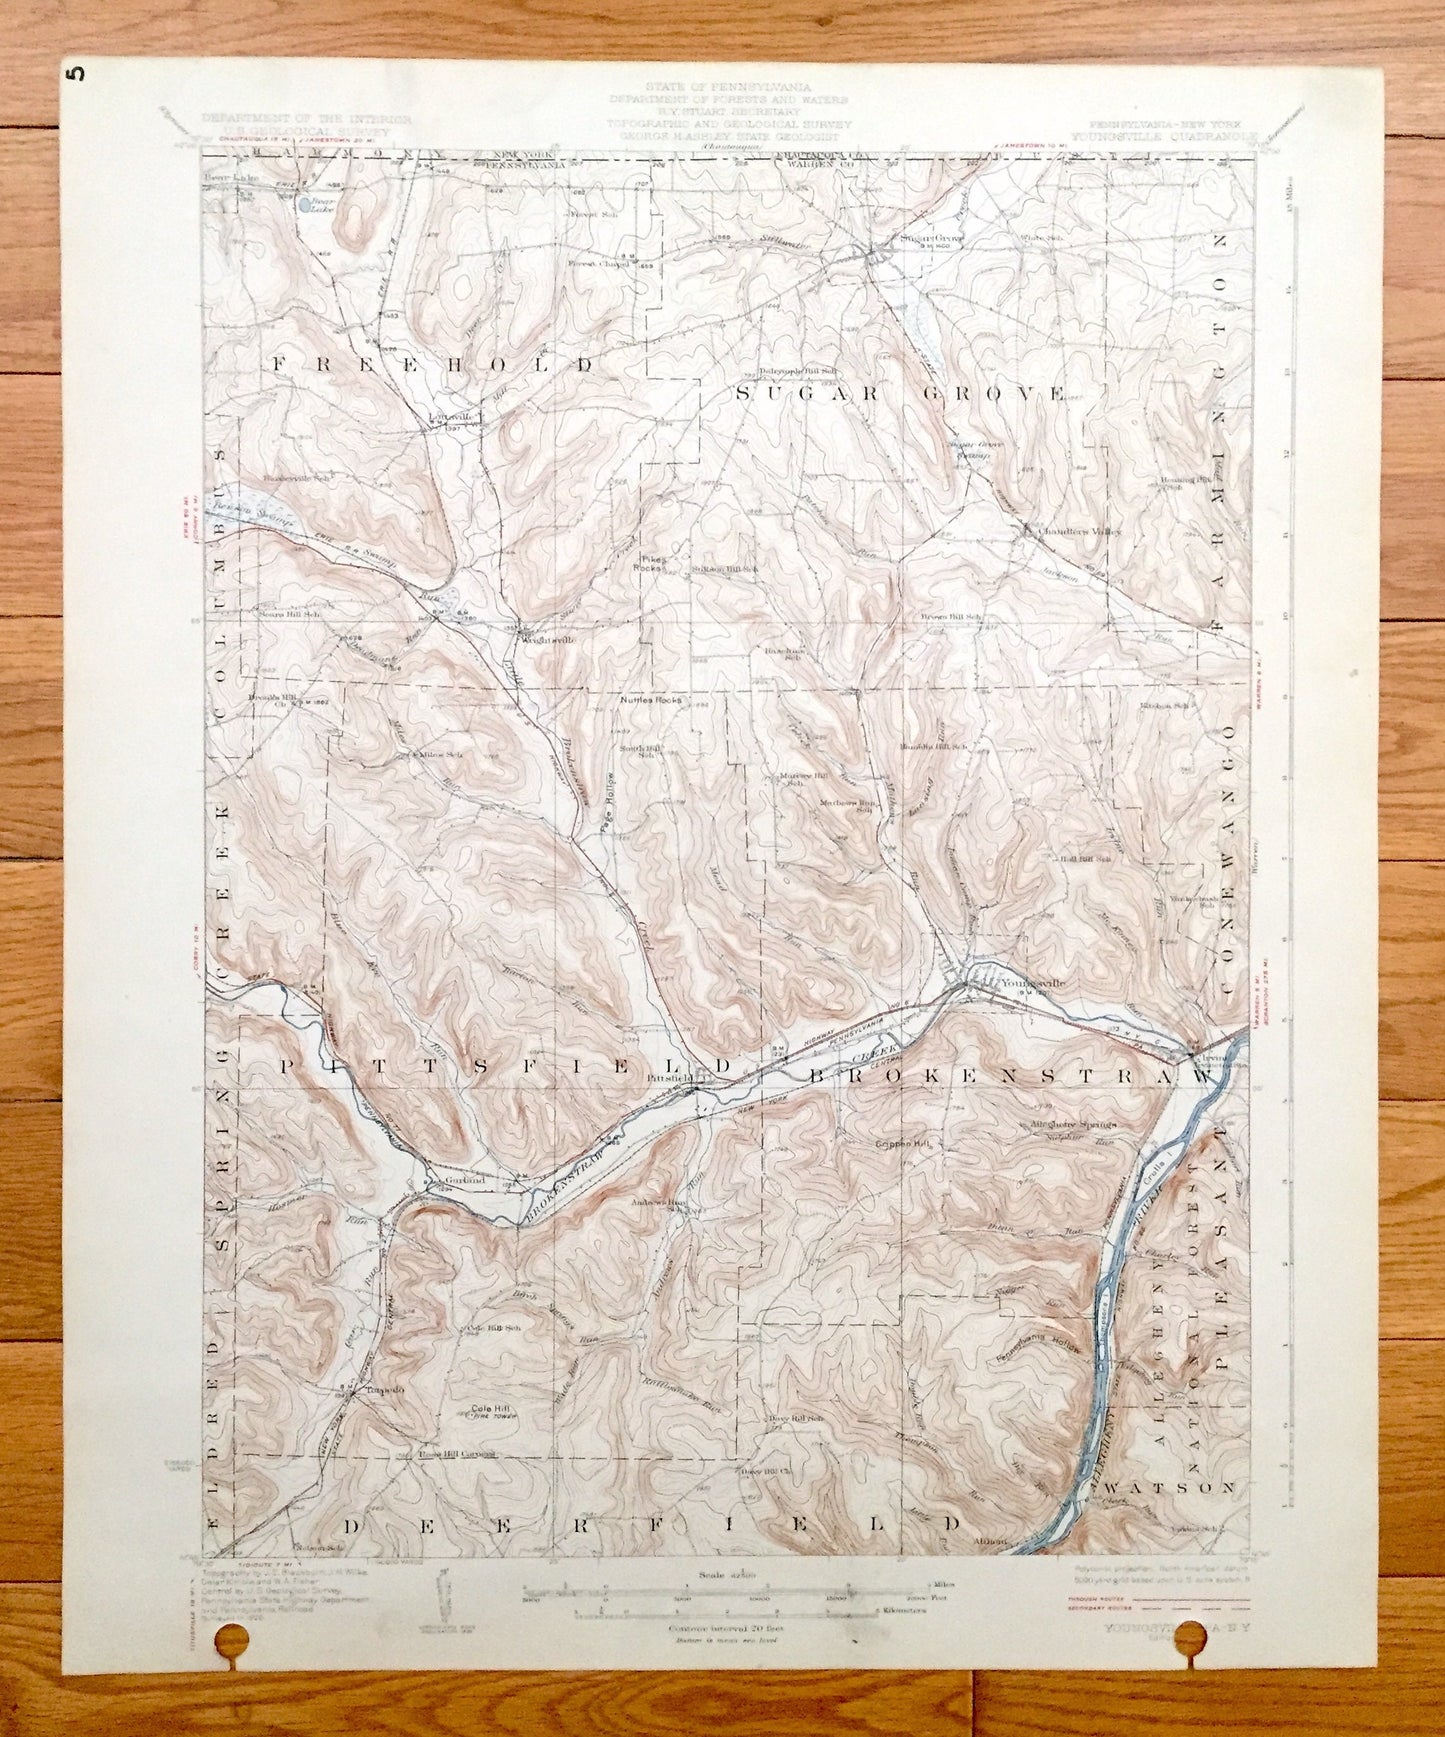 Antique Youngsville, Pennsylvania 1929 US Geological Survey Topographic Map - Brokenstraw, Pittsfield, Deerfield, Freehold, Sugar Grove